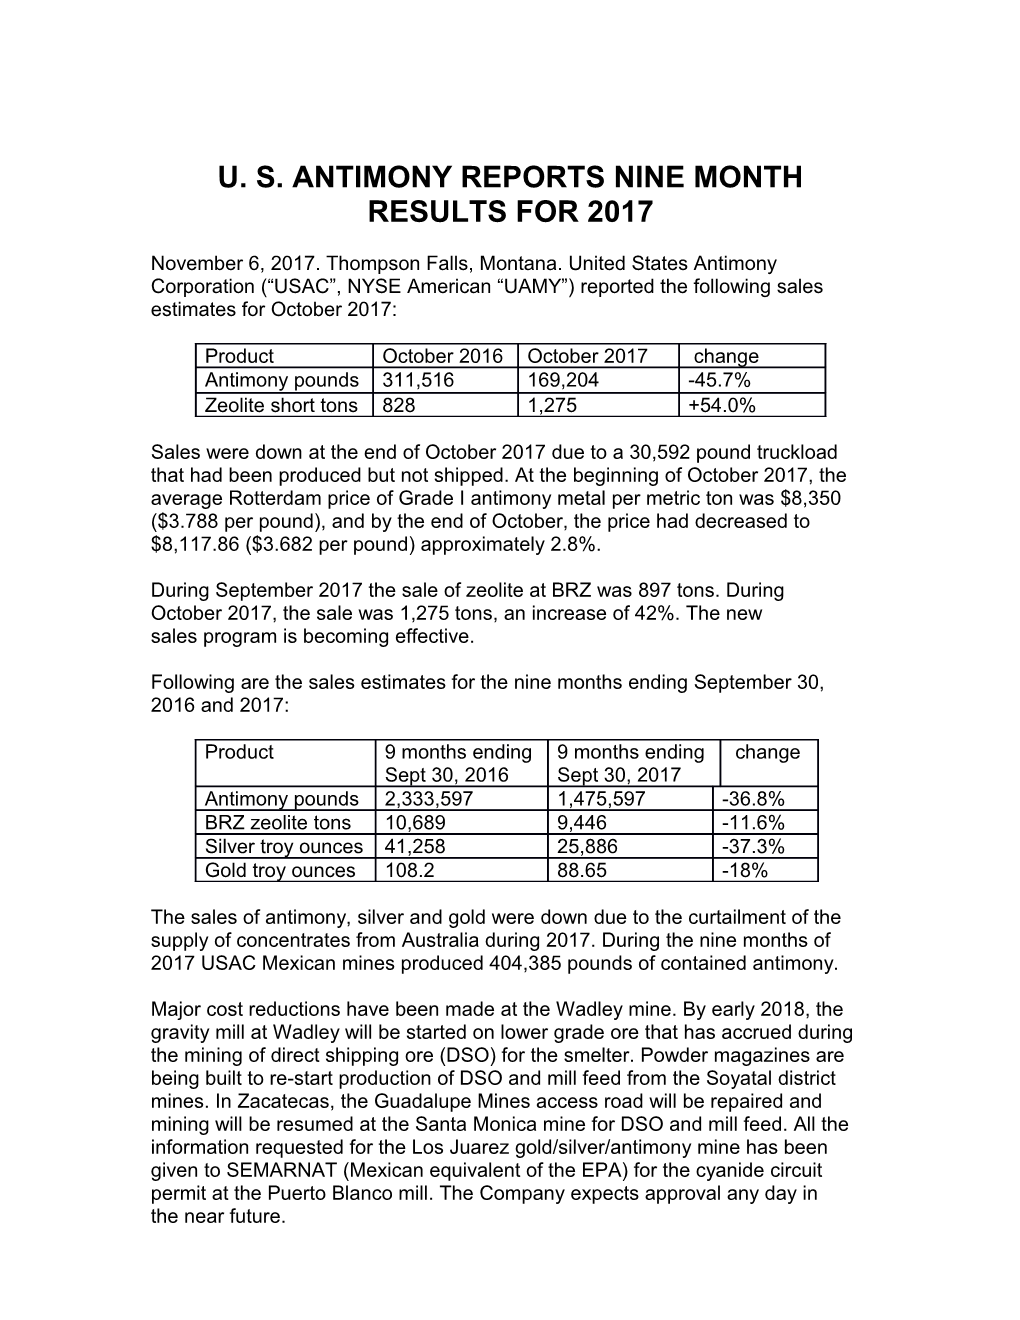 U. S. Antimony Reports Nine Month Results for 2017